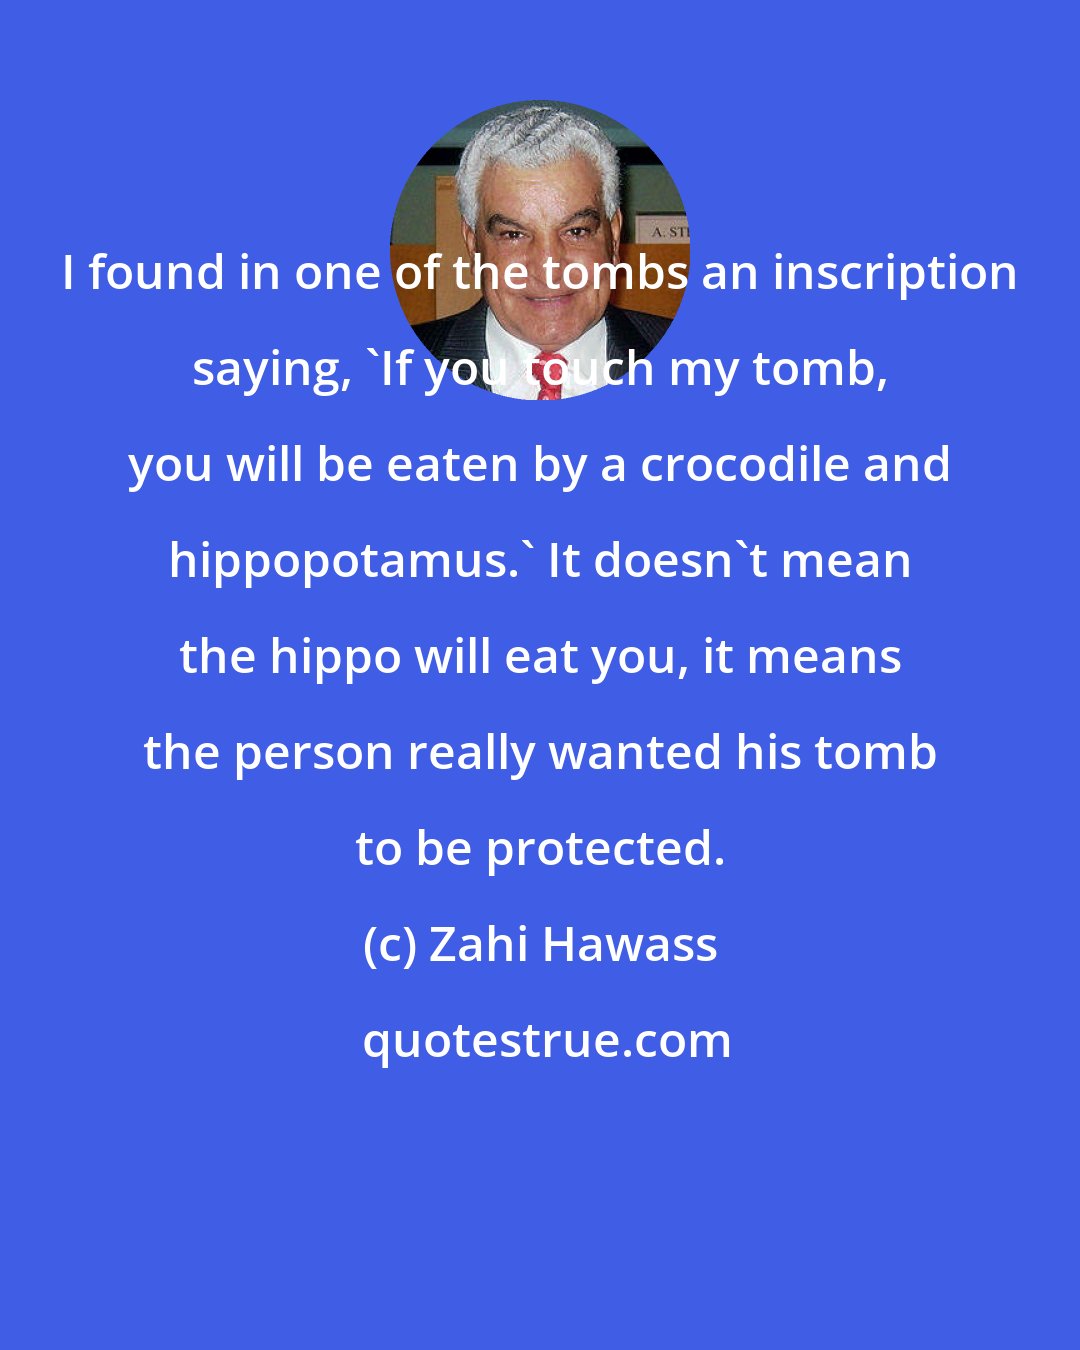 Zahi Hawass: I found in one of the tombs an inscription saying, 'If you touch my tomb, you will be eaten by a crocodile and hippopotamus.' It doesn't mean the hippo will eat you, it means the person really wanted his tomb to be protected.